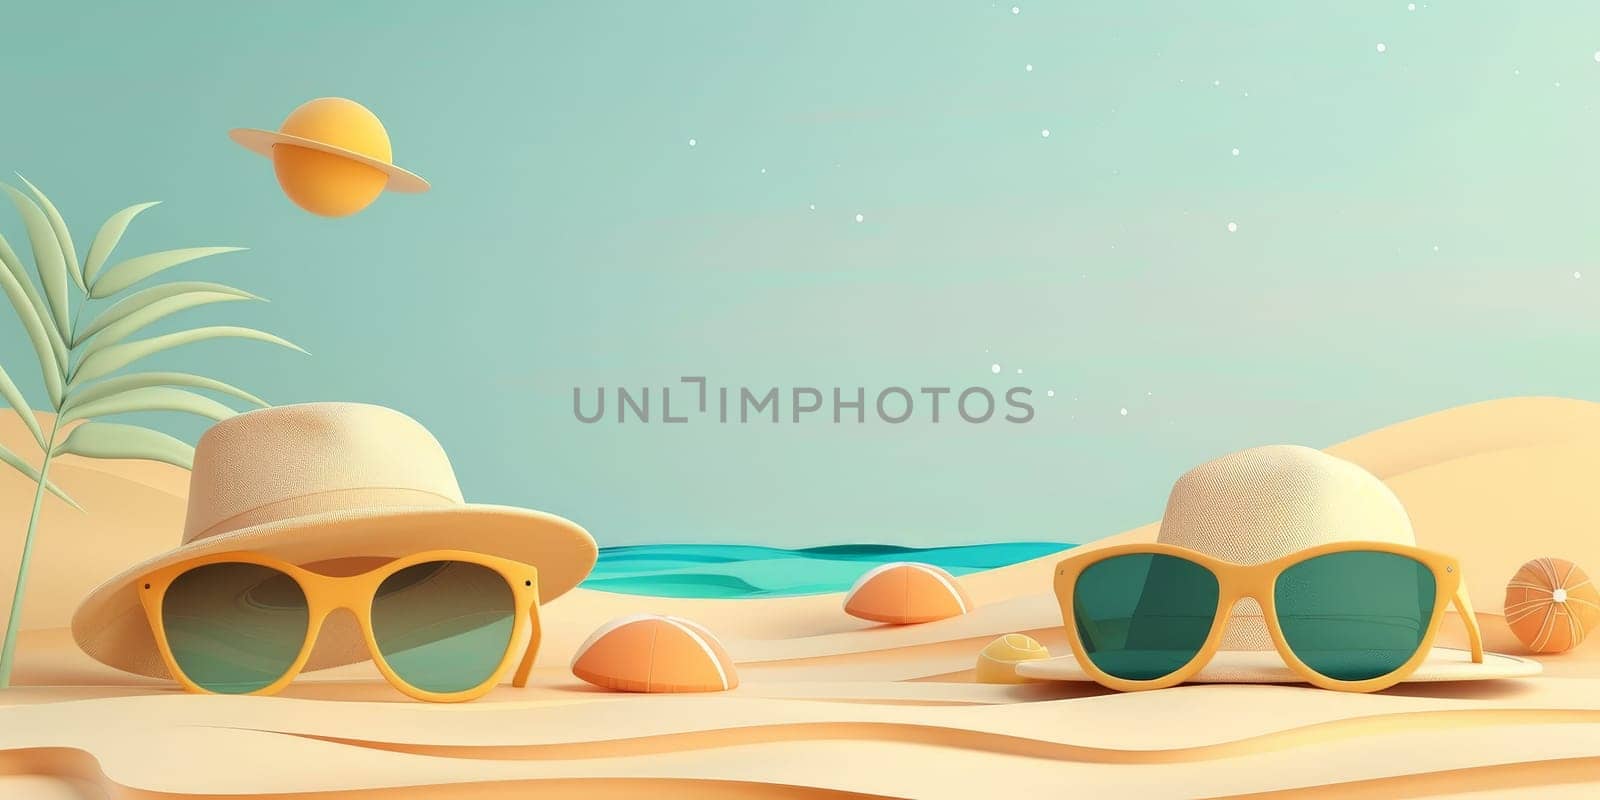 Two people are on a beach with sunglasses and hats. Scene is relaxed and carefree